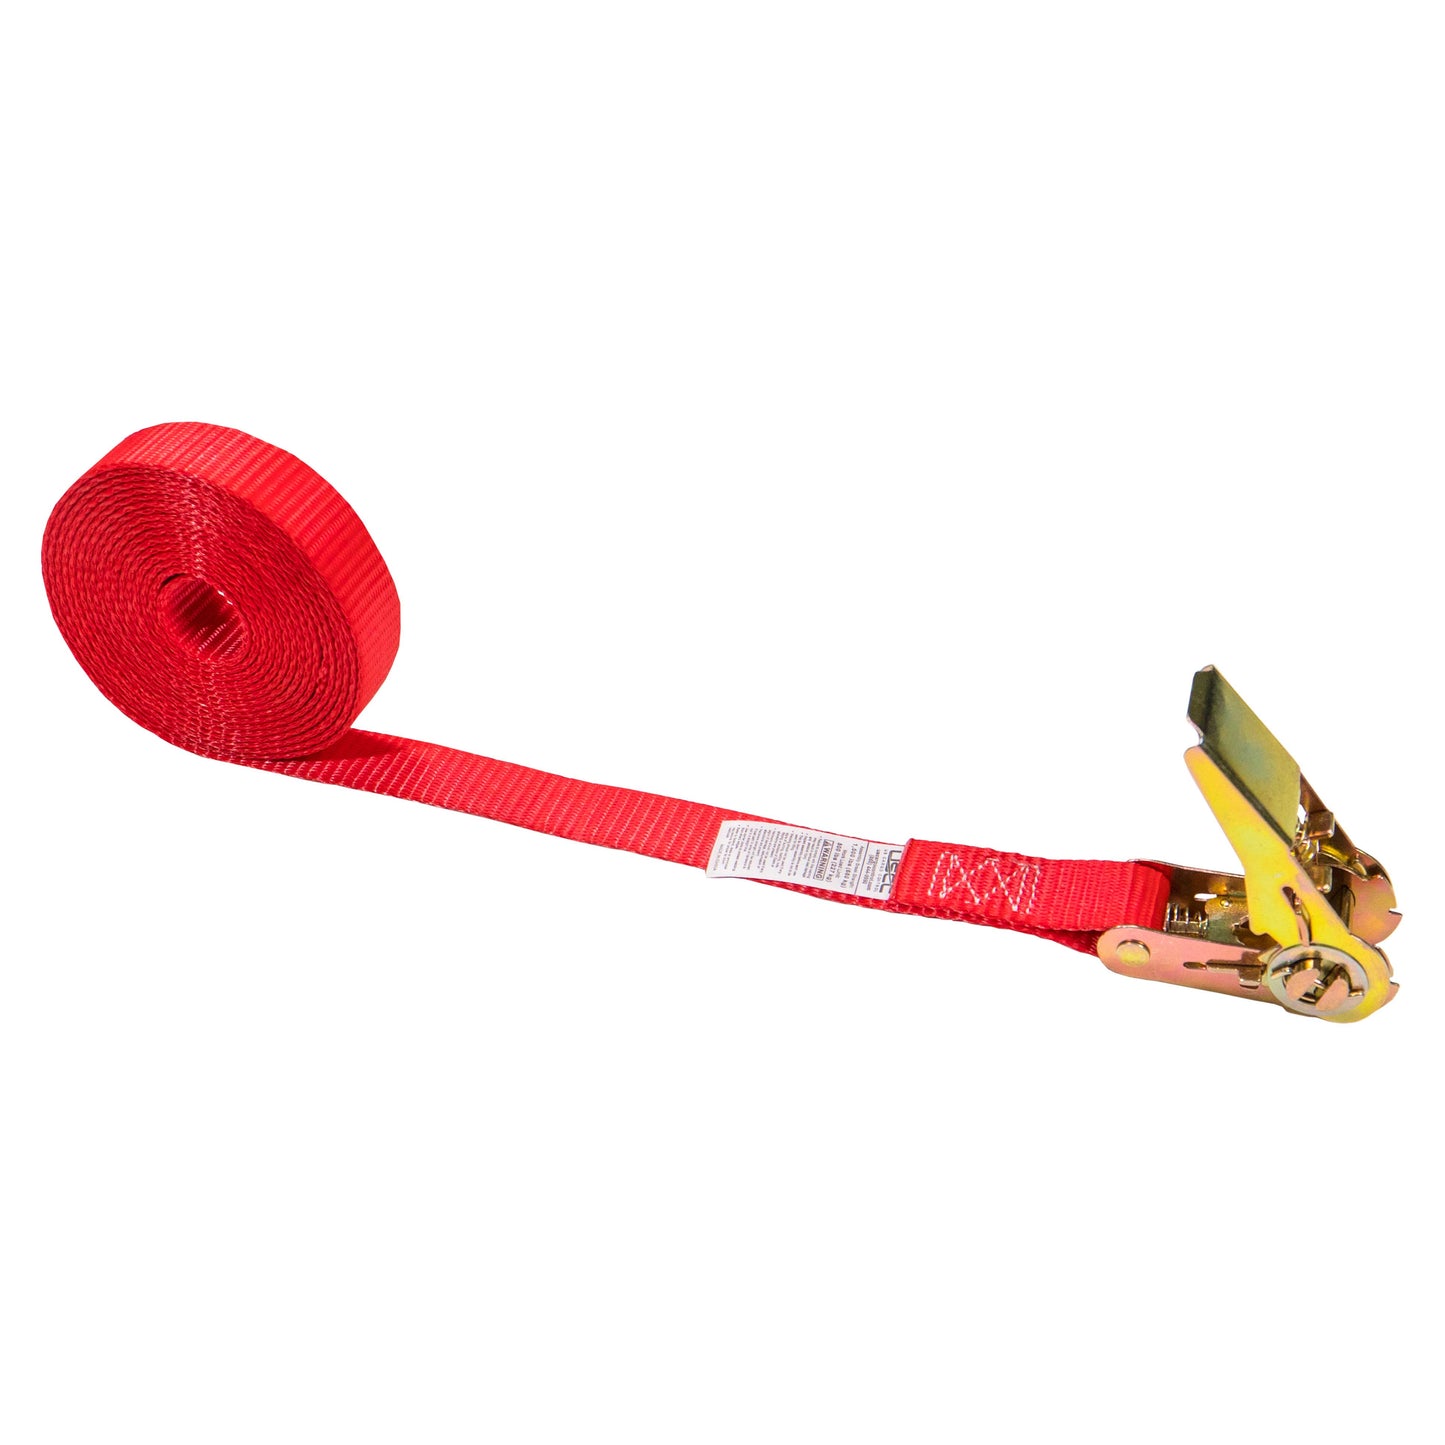 1 inch x 13 foot Red Endless Ratchet Strap image 1 of 9